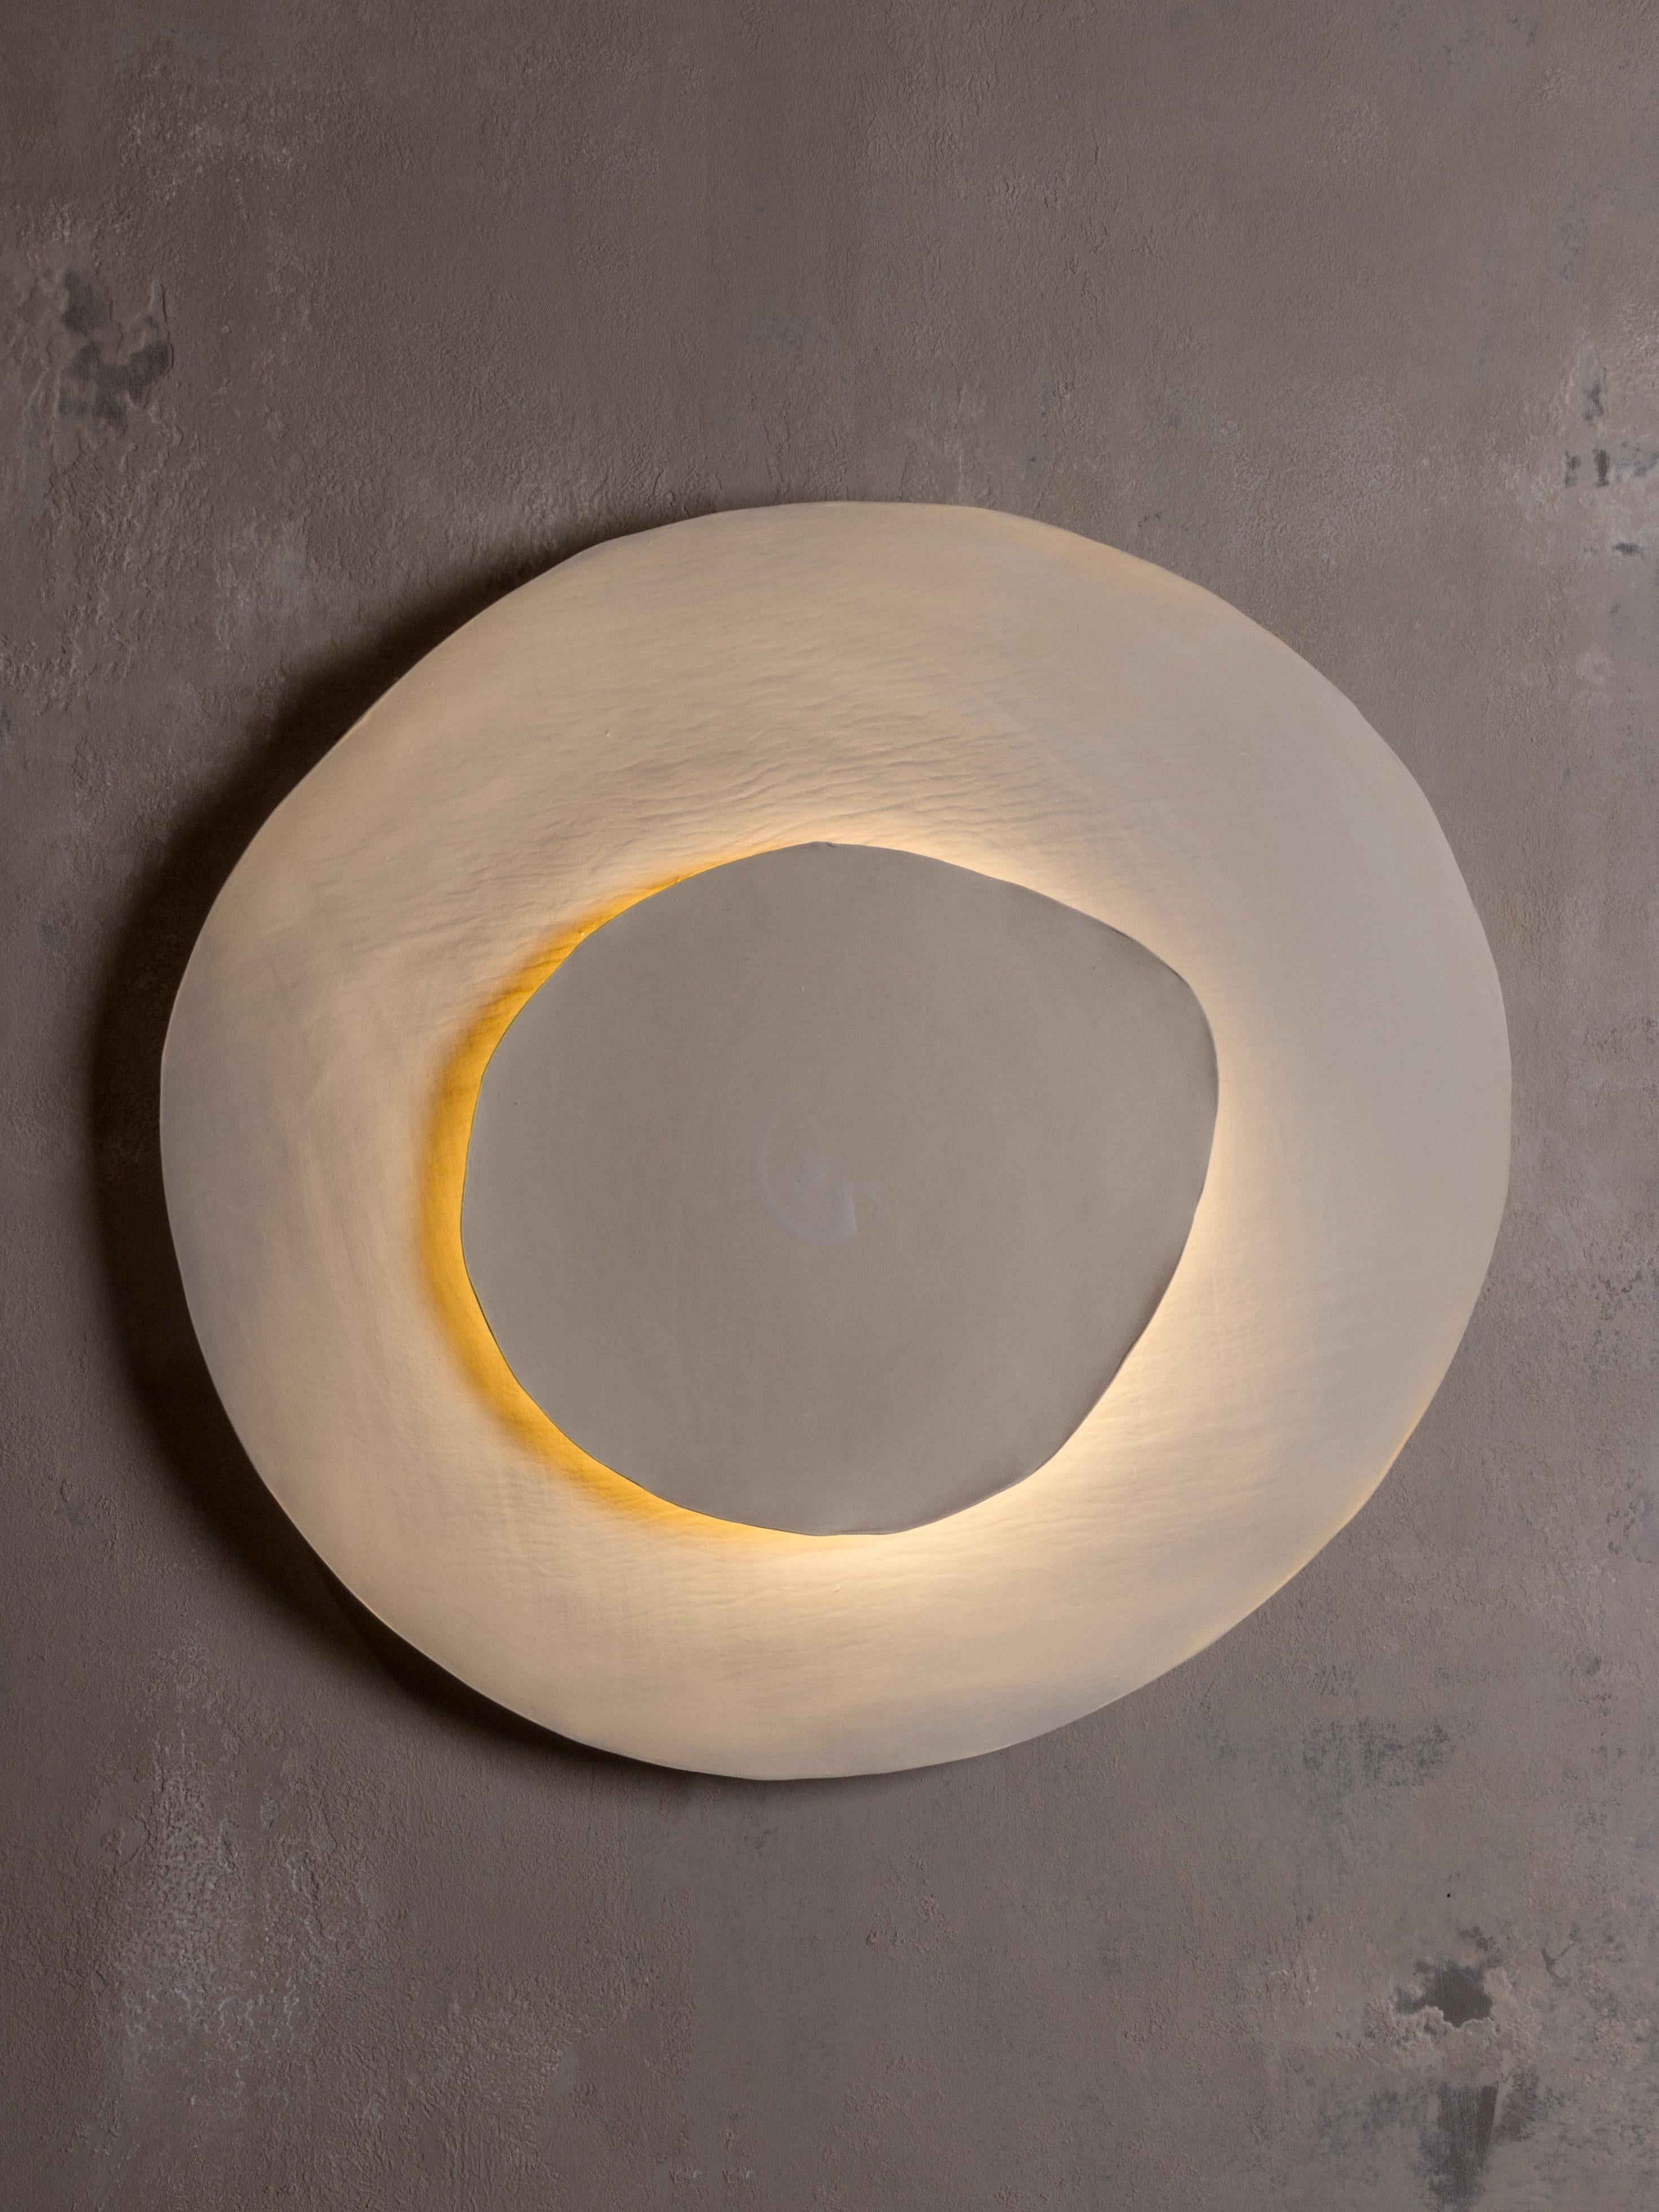 Silk #19 wall light by Margaux Leycuras
One of a Kind. Signed and numbered.
Dimensions: Ø 54 x H 58 cm
Material: Ceramic, sandy stoneware platters with a porcelain slip finish.
The piece is signed, numbered and delivered with a certificate of